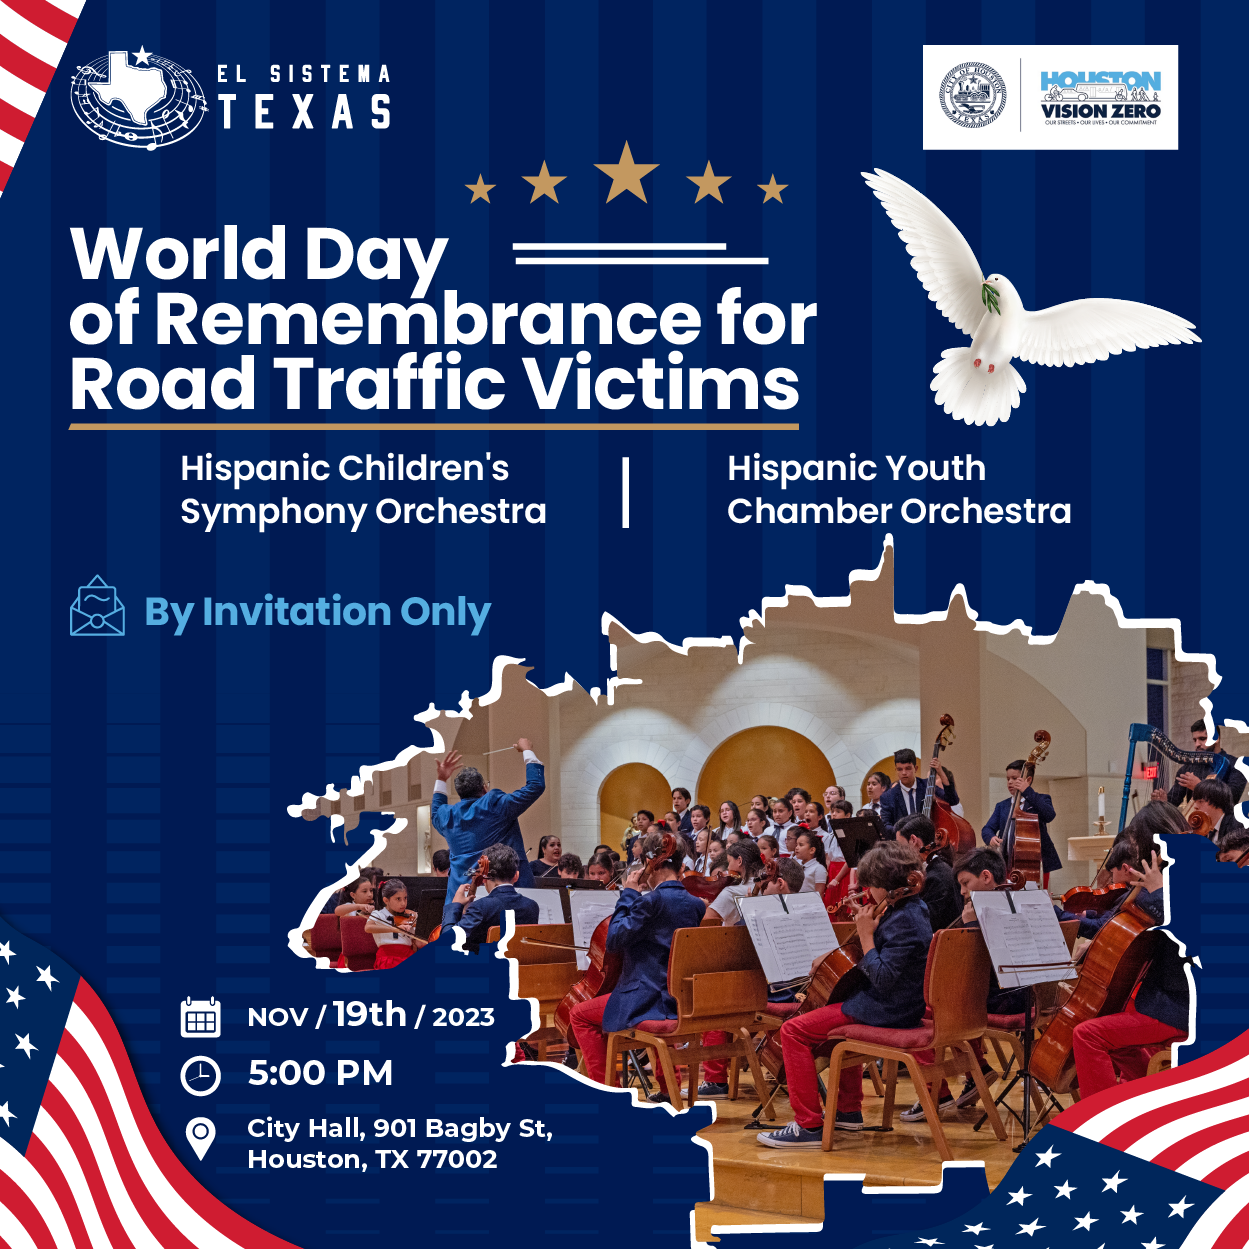 World Day of Remembrance for Road Traffic Victims - El Sistema Texas